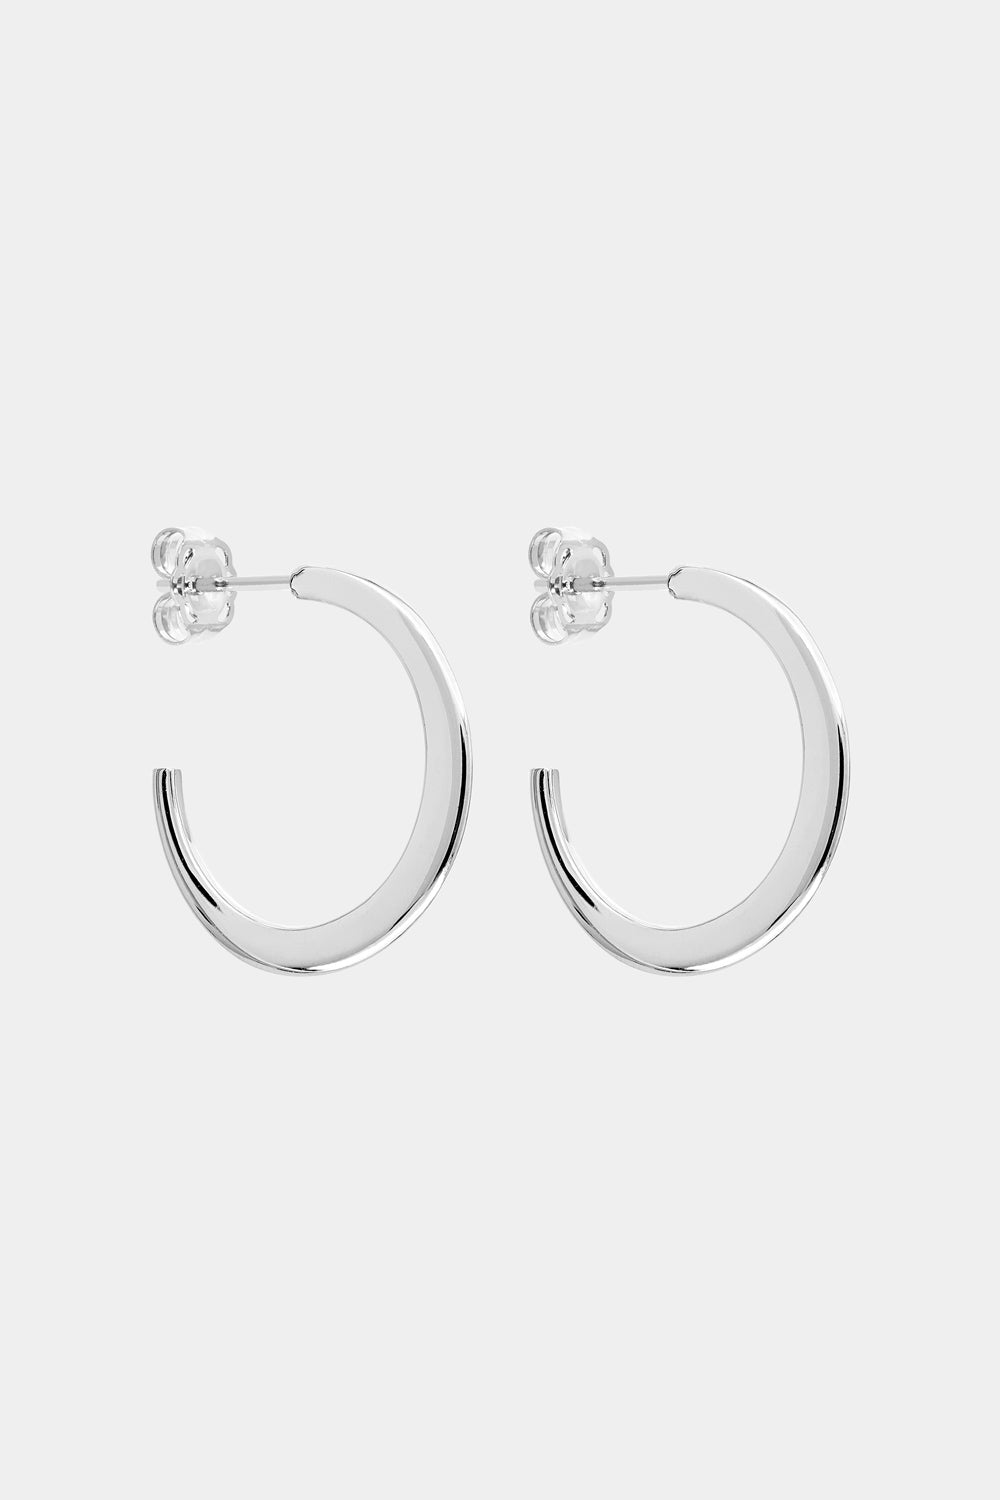 Single Band Hoops | Silver or 9K White Gold, More Options Available